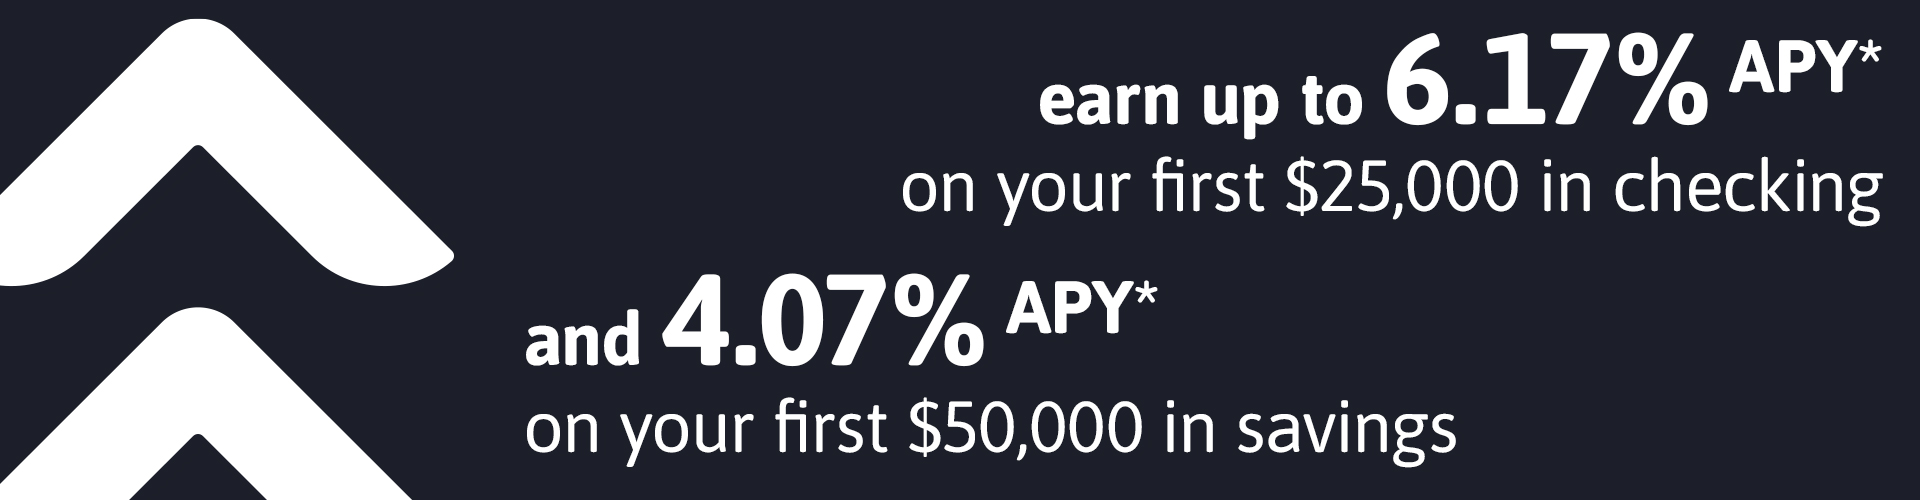 6.17% APY on first 25,000 or 4% on first 50,000